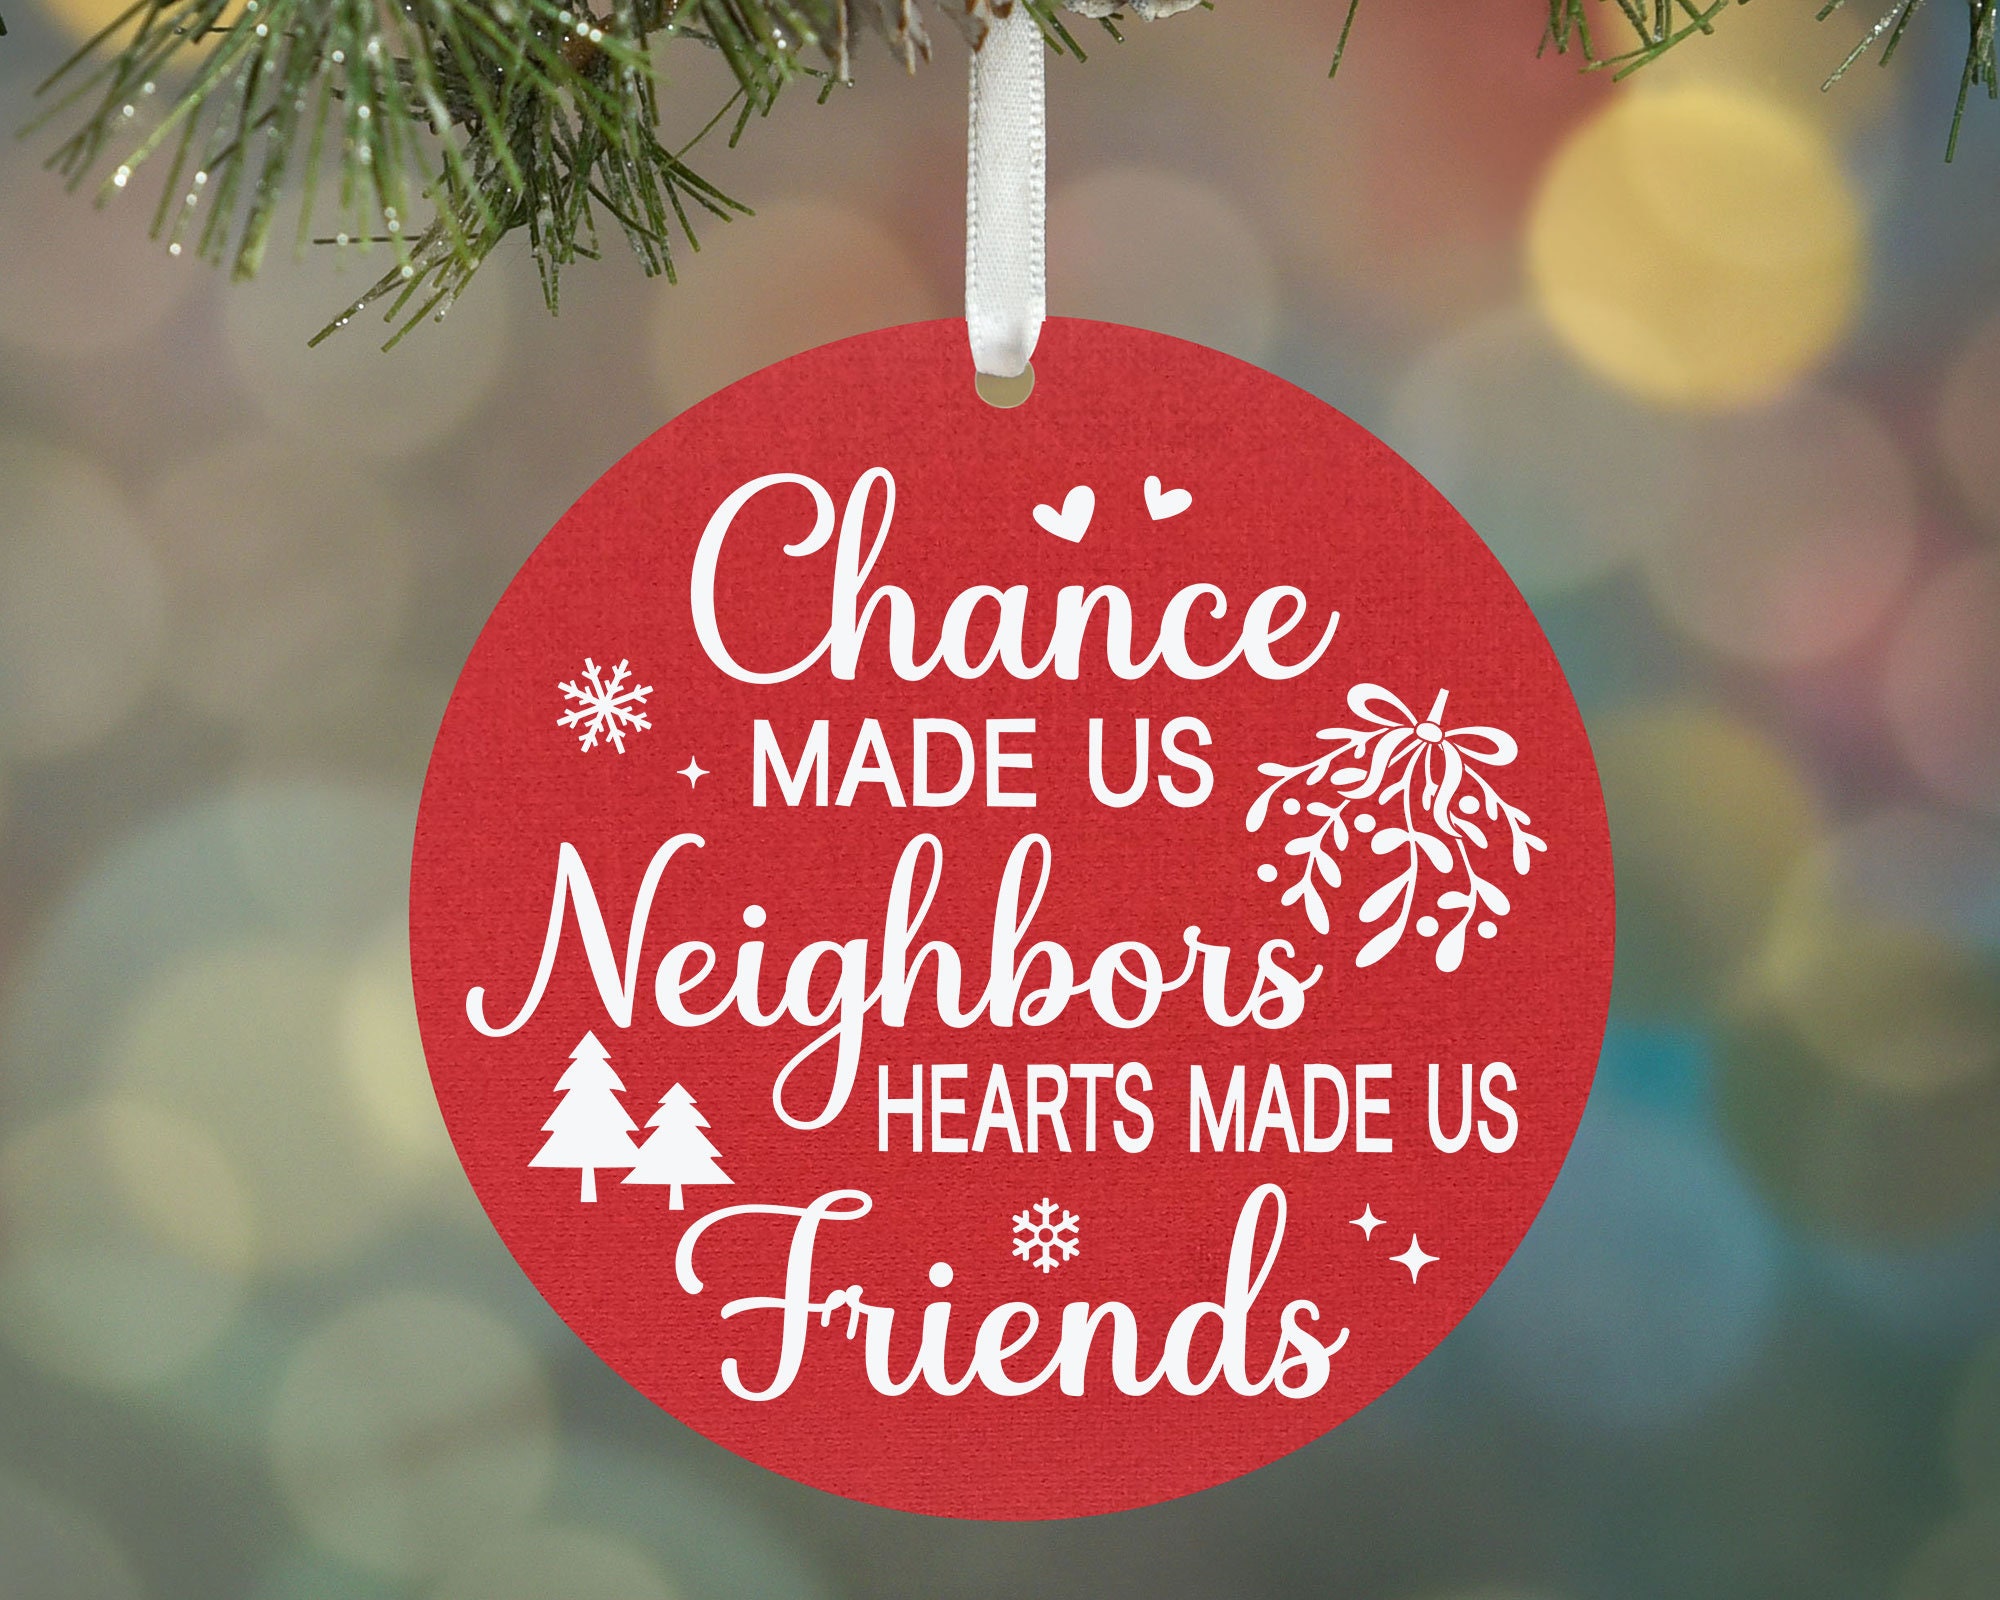 Chance Made Us Neighbor Hearts Made Us Friends Ornament, Personalized  Christmas Ornaments, Christmas Ornaments, Holiday Ornaments, Ornament Gifts